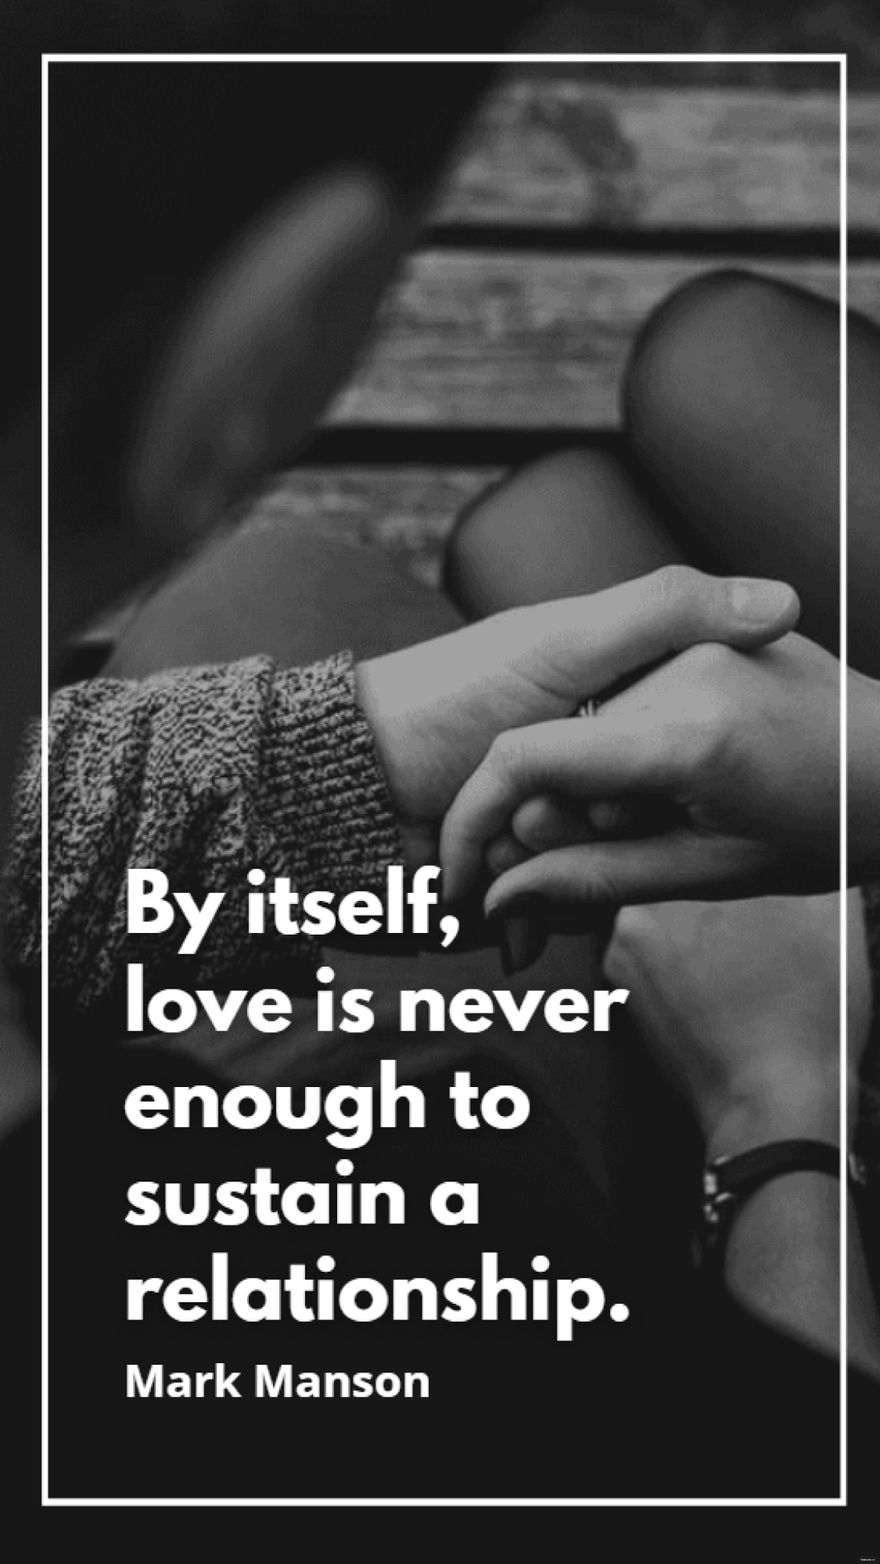 Mark Manson - By itself, love is never enough to sustain a relationship.